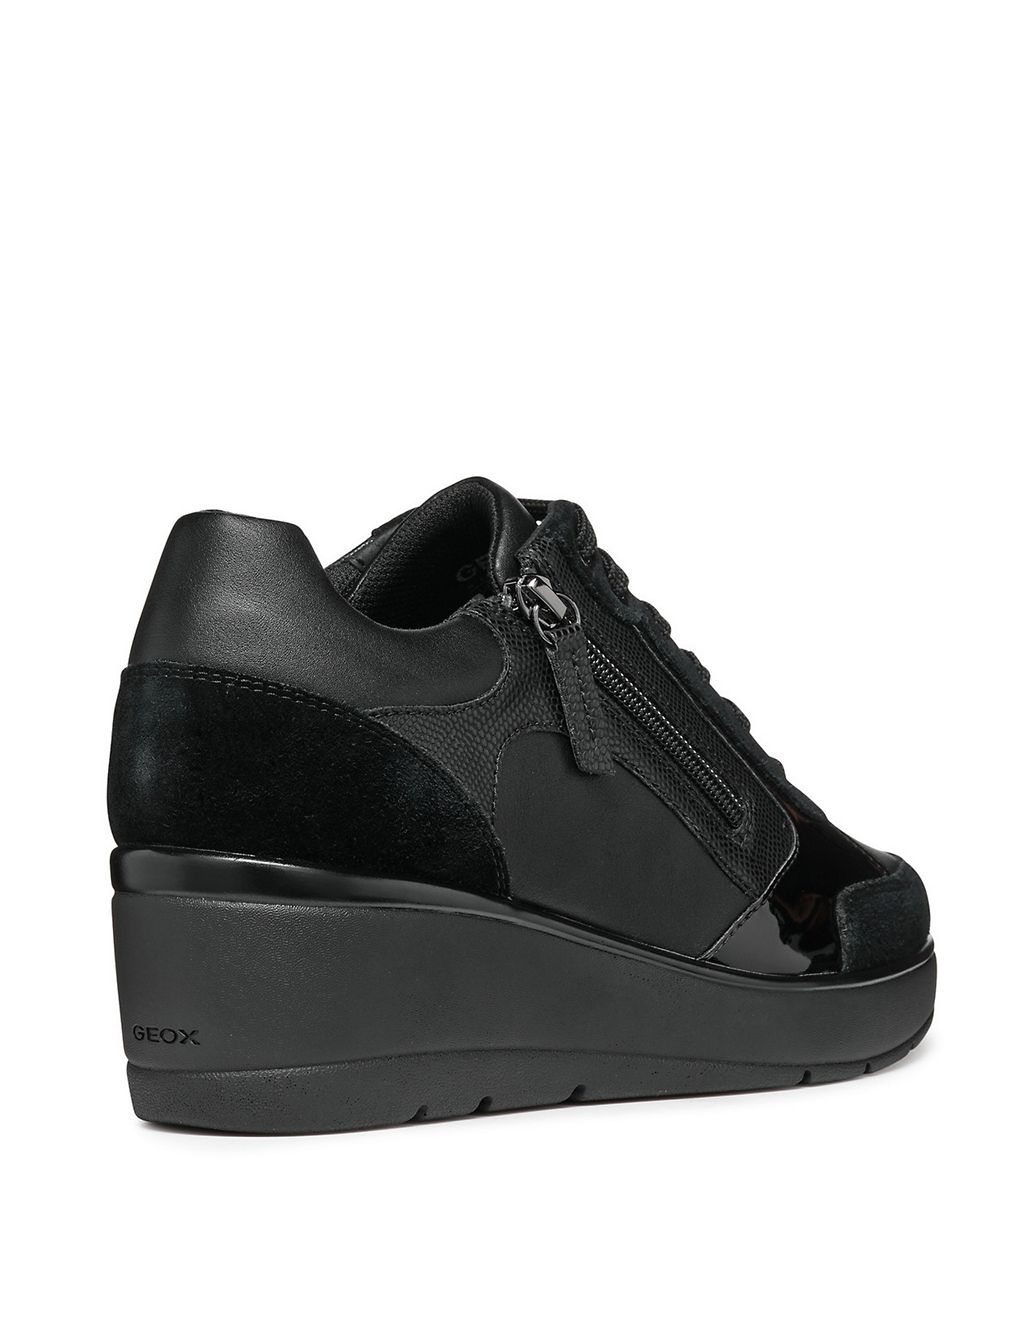 Leather Lace Up Wedge Heel Trainers 4 of 6